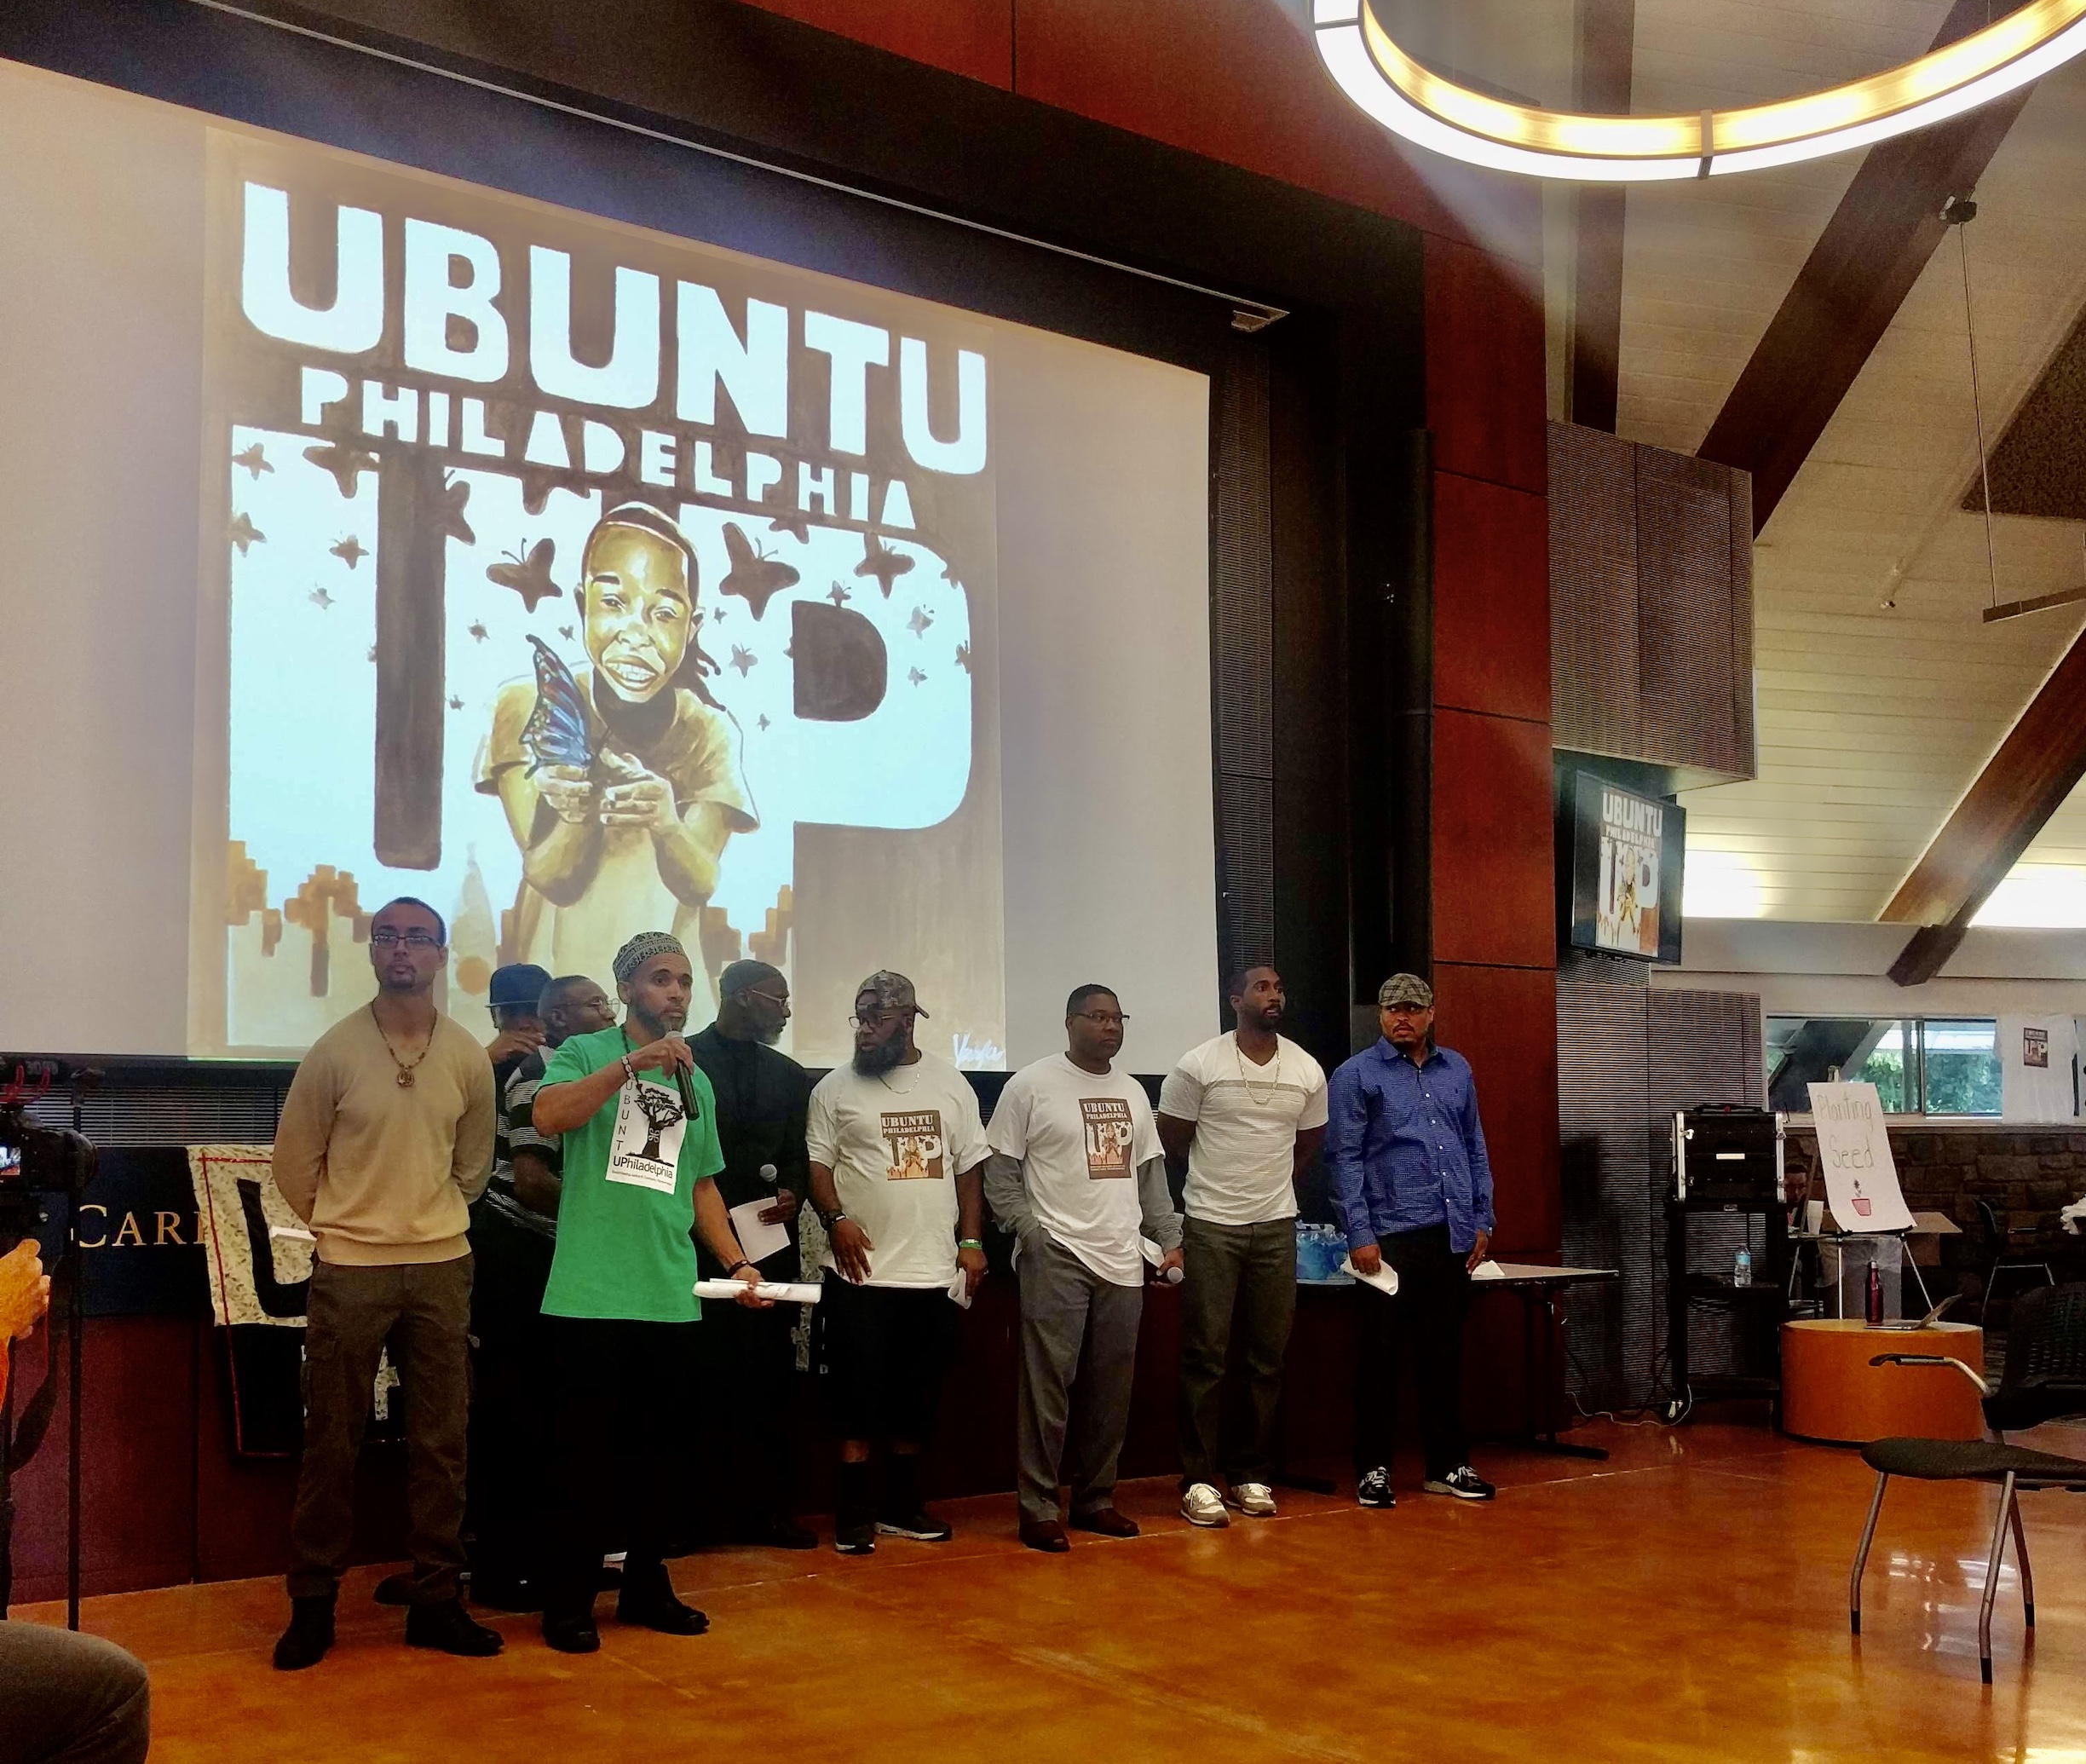 A group of returned juvenile lifers gather at Ubuntu Philadelphia and pledge to foster healing in the community. 